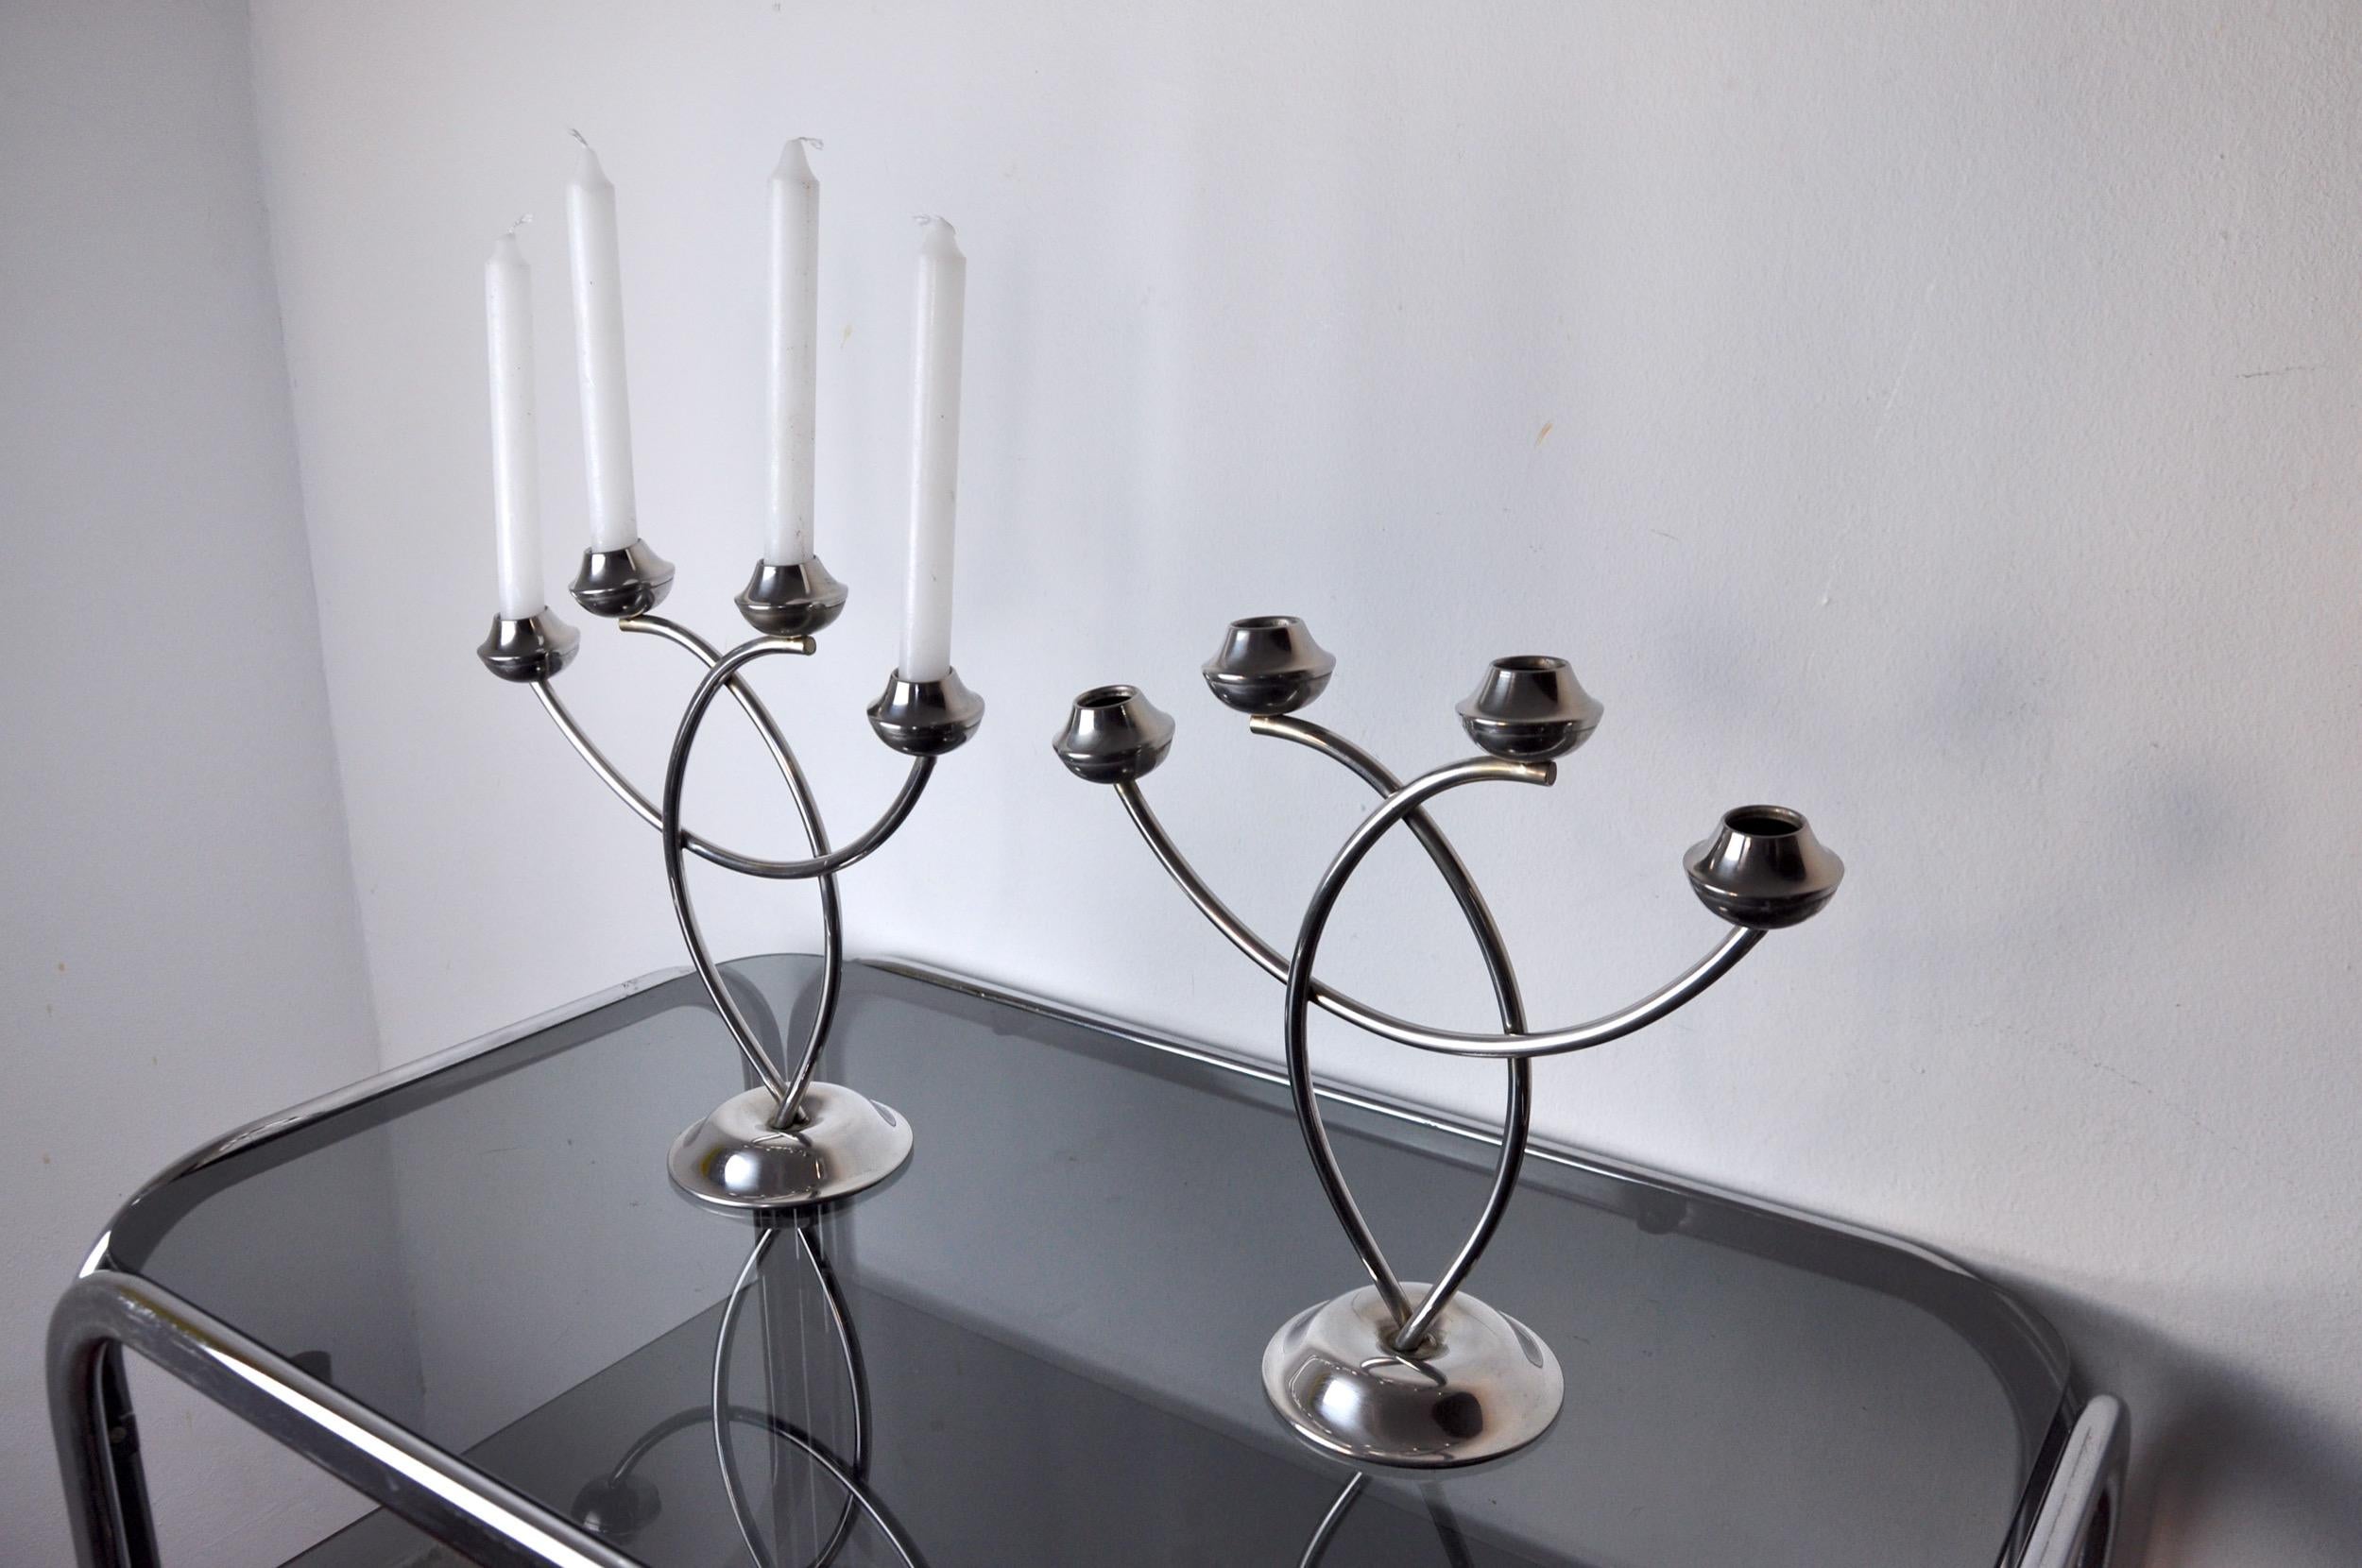 Hollywood Regency Pair of Art Deco Candle Holder in Stainless Steel 4 Flammes, Spain, 1970 For Sale